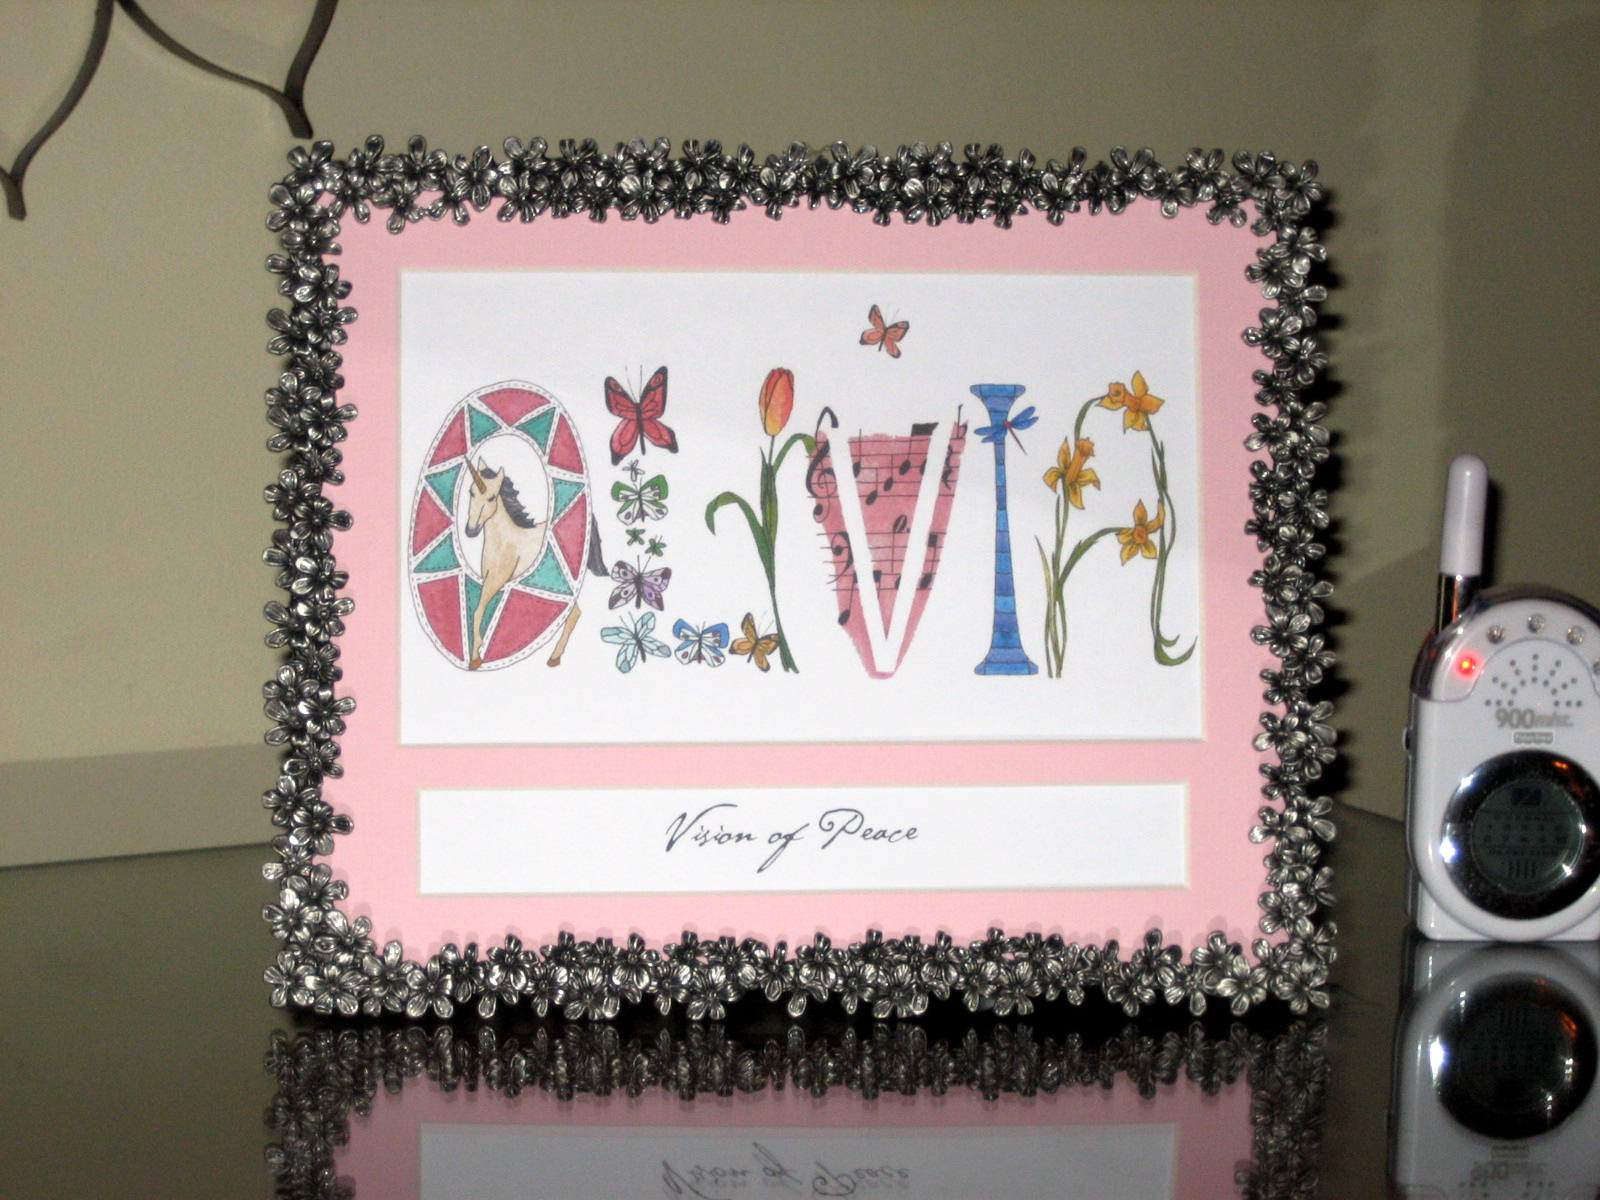 Thank you so much – you have the prettiest personalized name art to be found